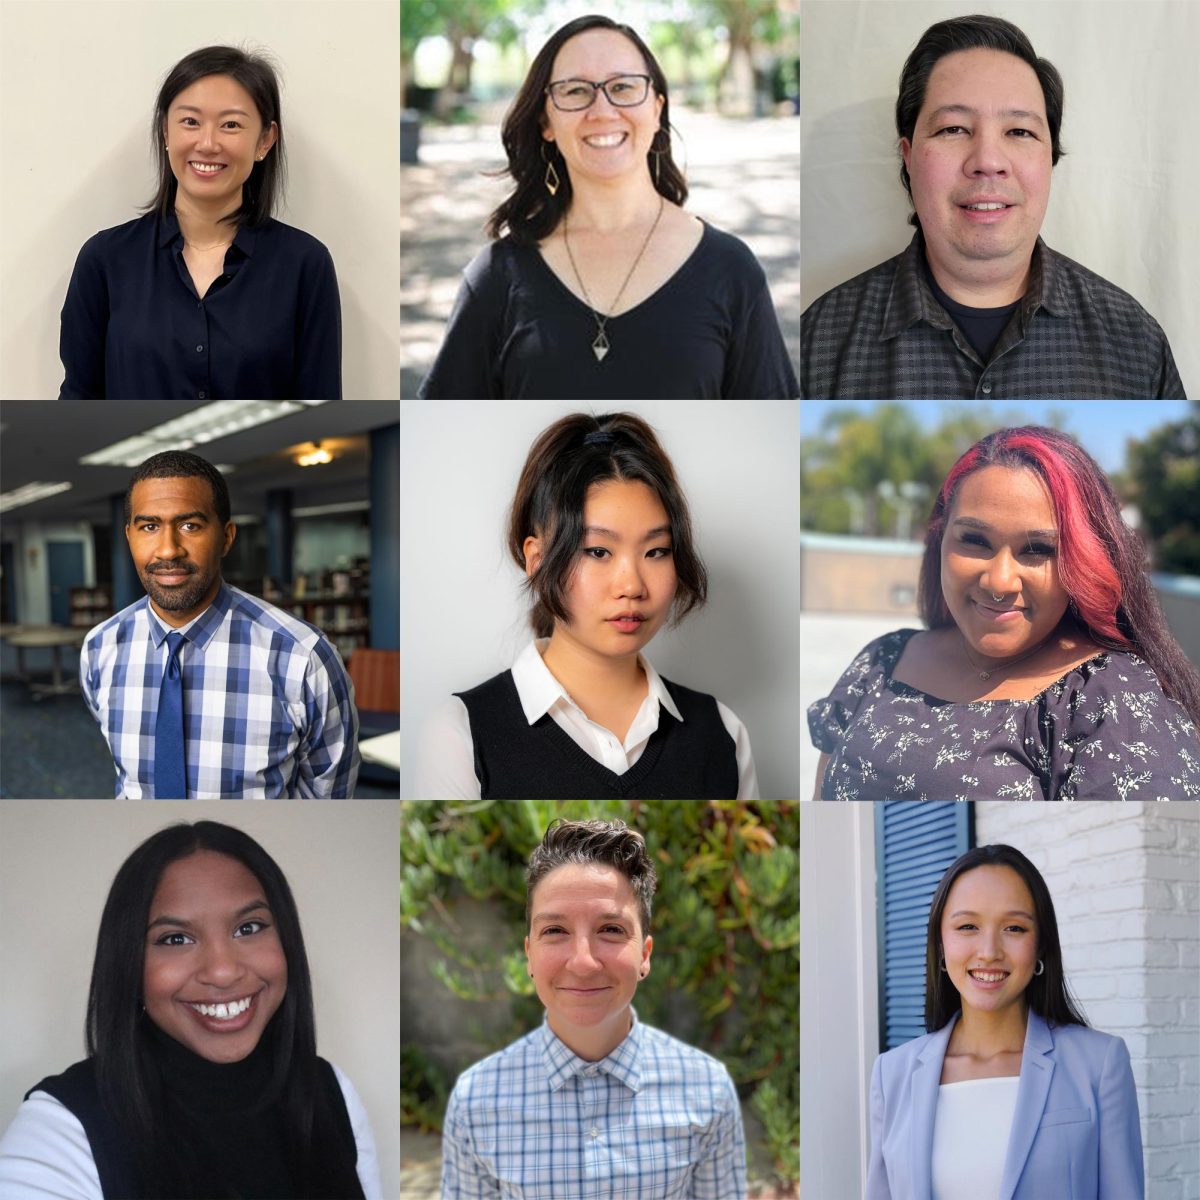 From left to right, top to bottom: Yolanda Wu, Leslie Blanchette, Jason Moss, Brandon Lincoln, Leah Whang, Ari Roby, Cristina Lopez-Green, Jules Favorito and Lauren Choi.